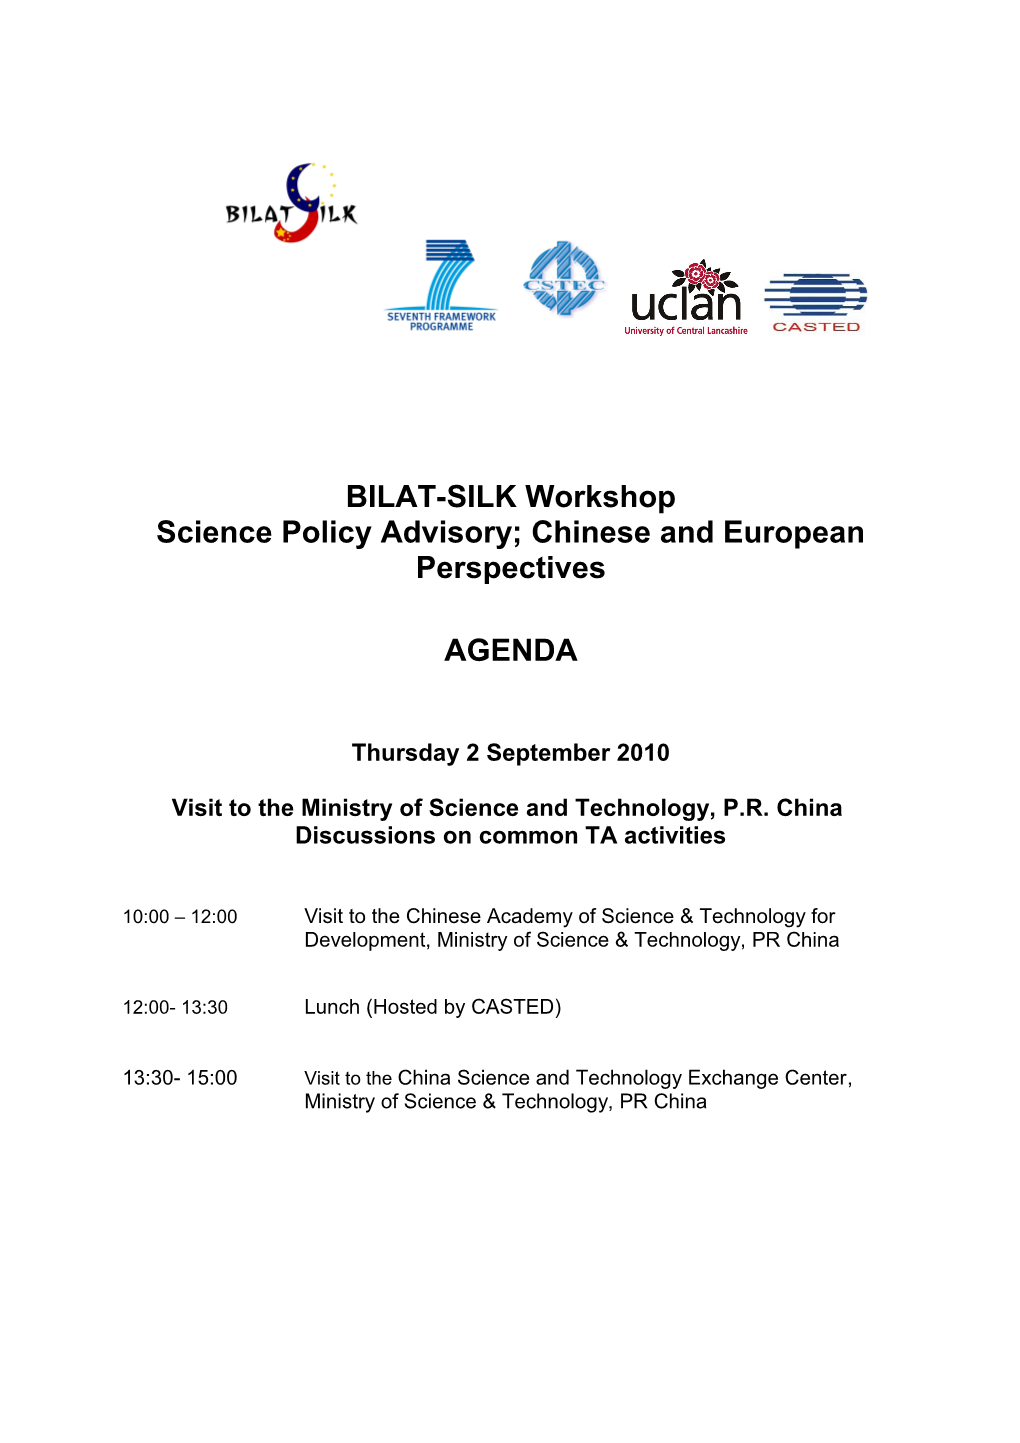 Science Policy Advisory; Chinese and European Perspectives